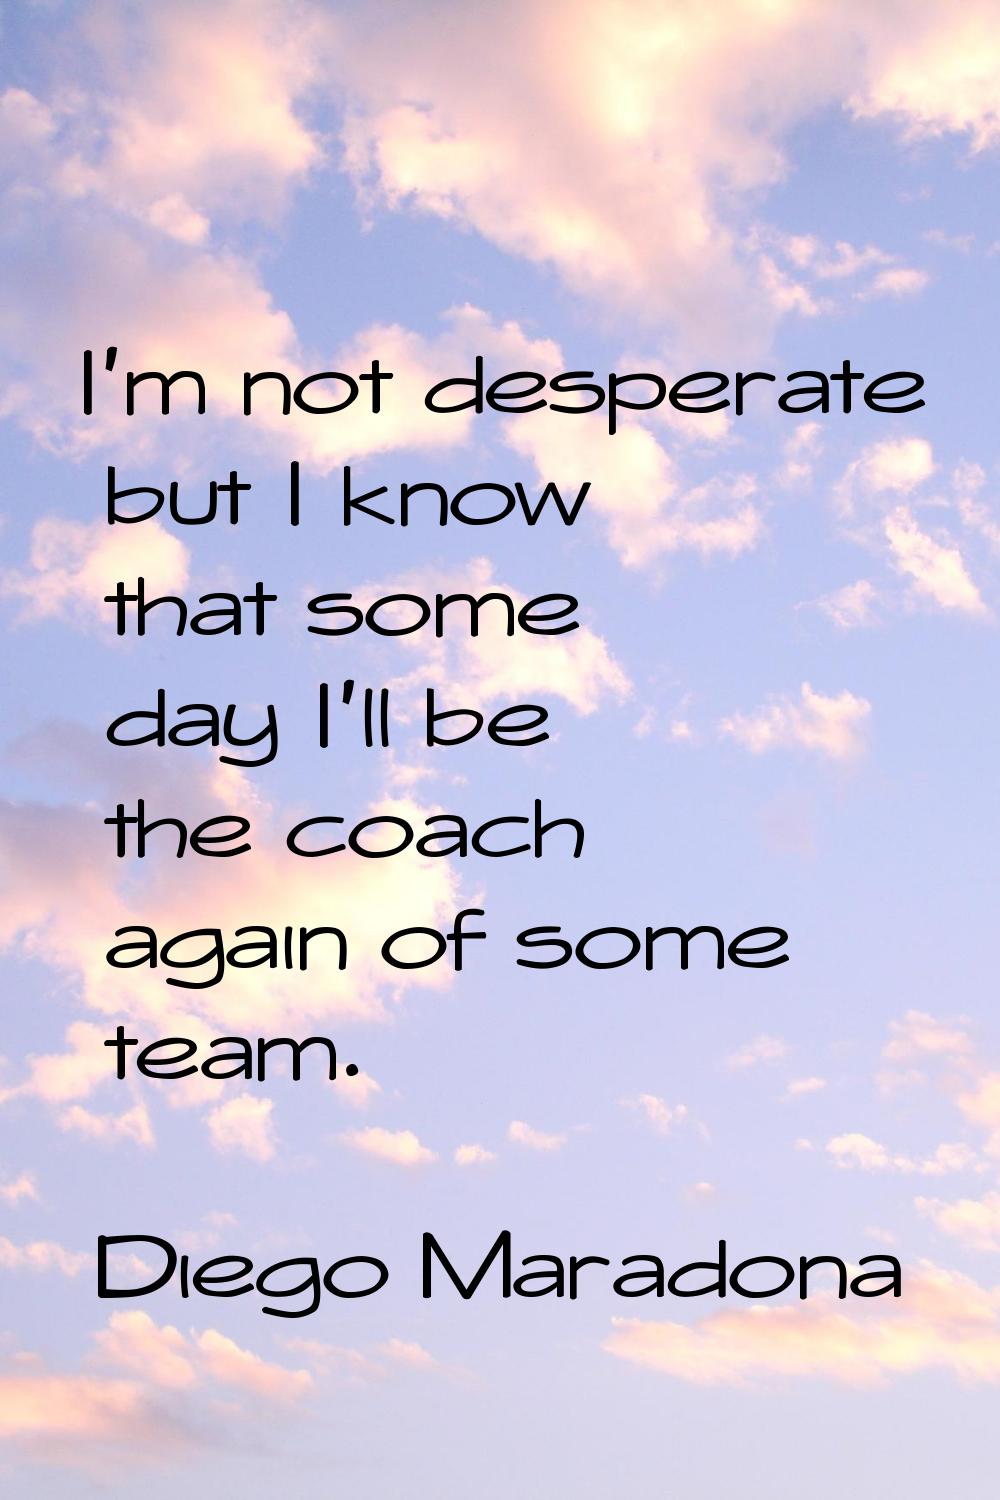 I'm not desperate but I know that some day I'll be the coach again of some team.